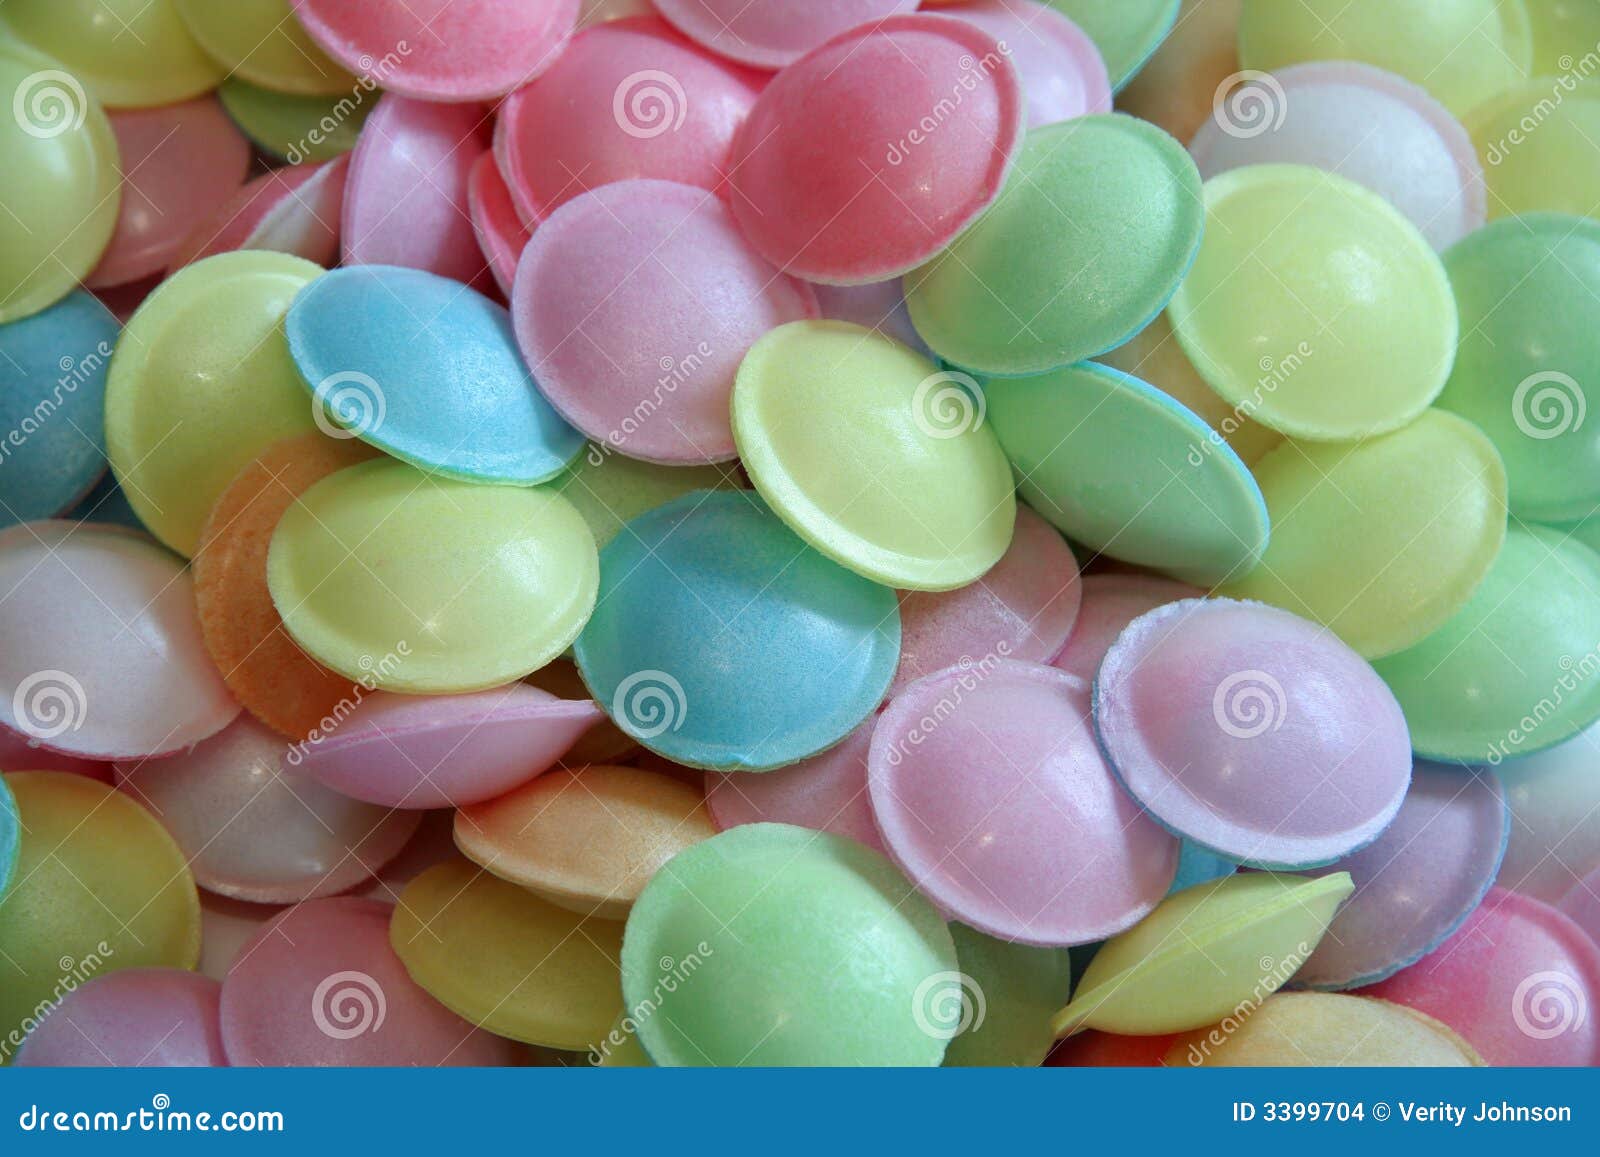 flying saucers